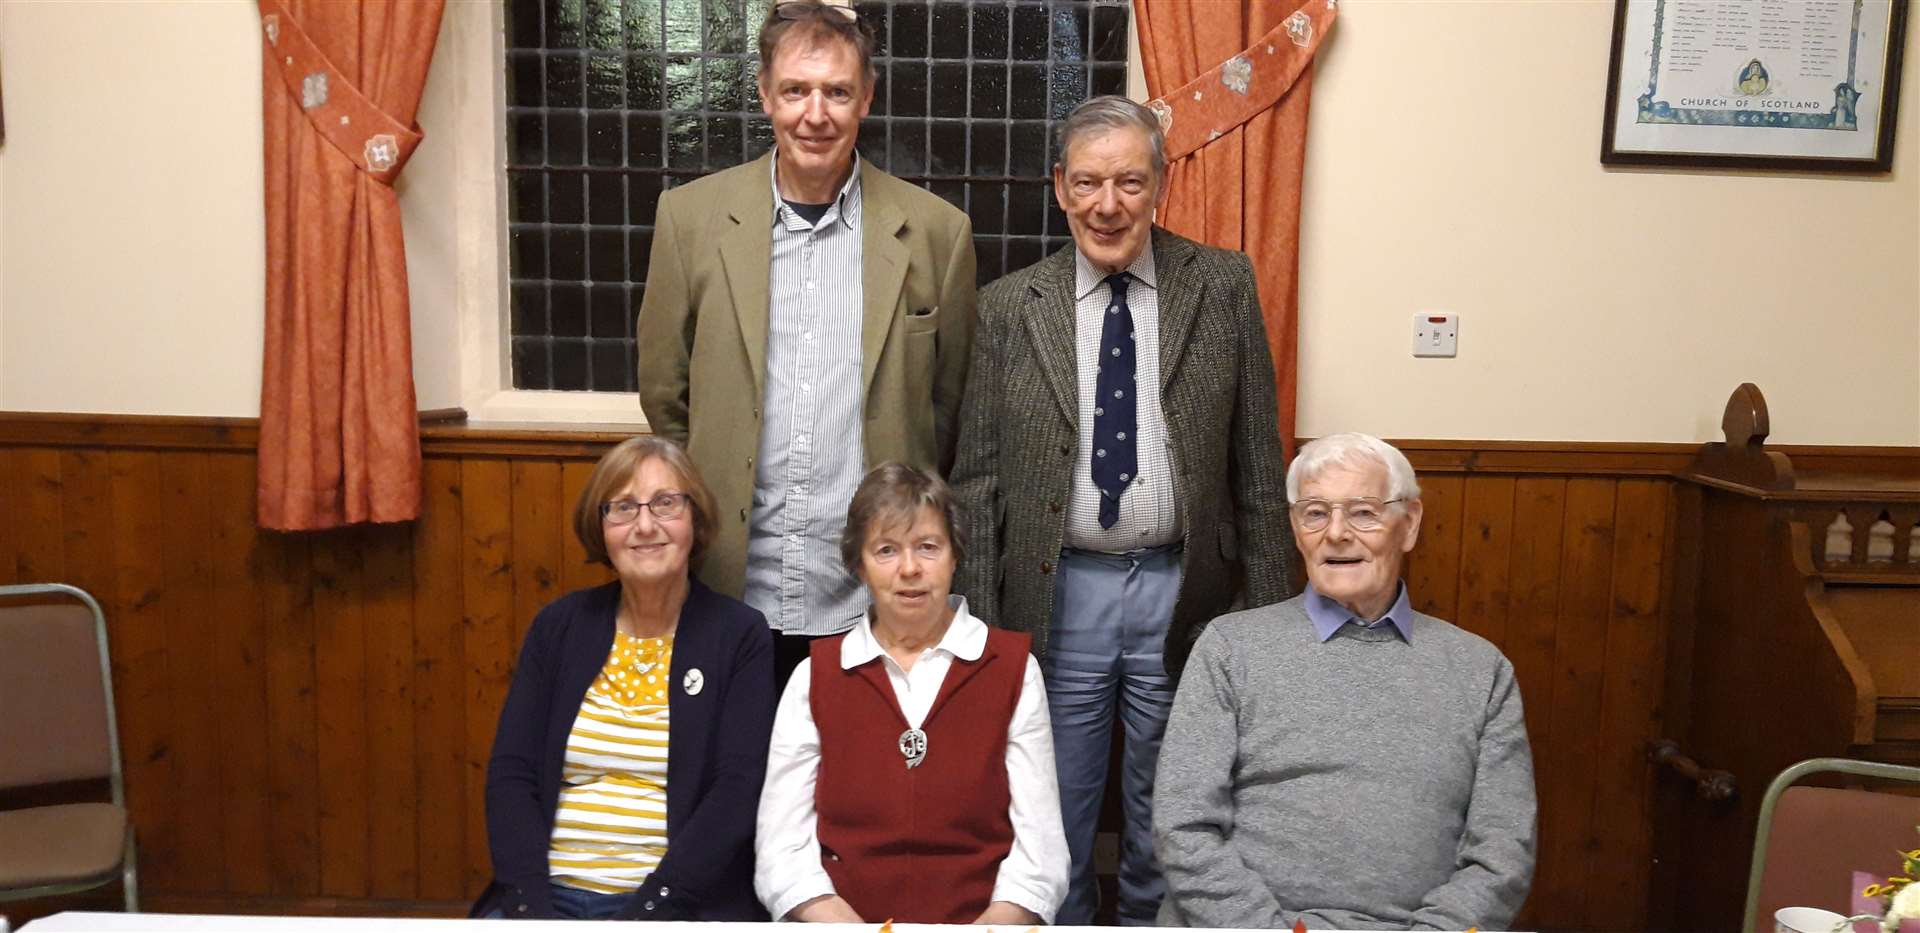 Association stalwarts, clockwise from top right, Michael Baird, Douglas Sutherland, Diana Royce, Sue Steven and John McMorran.